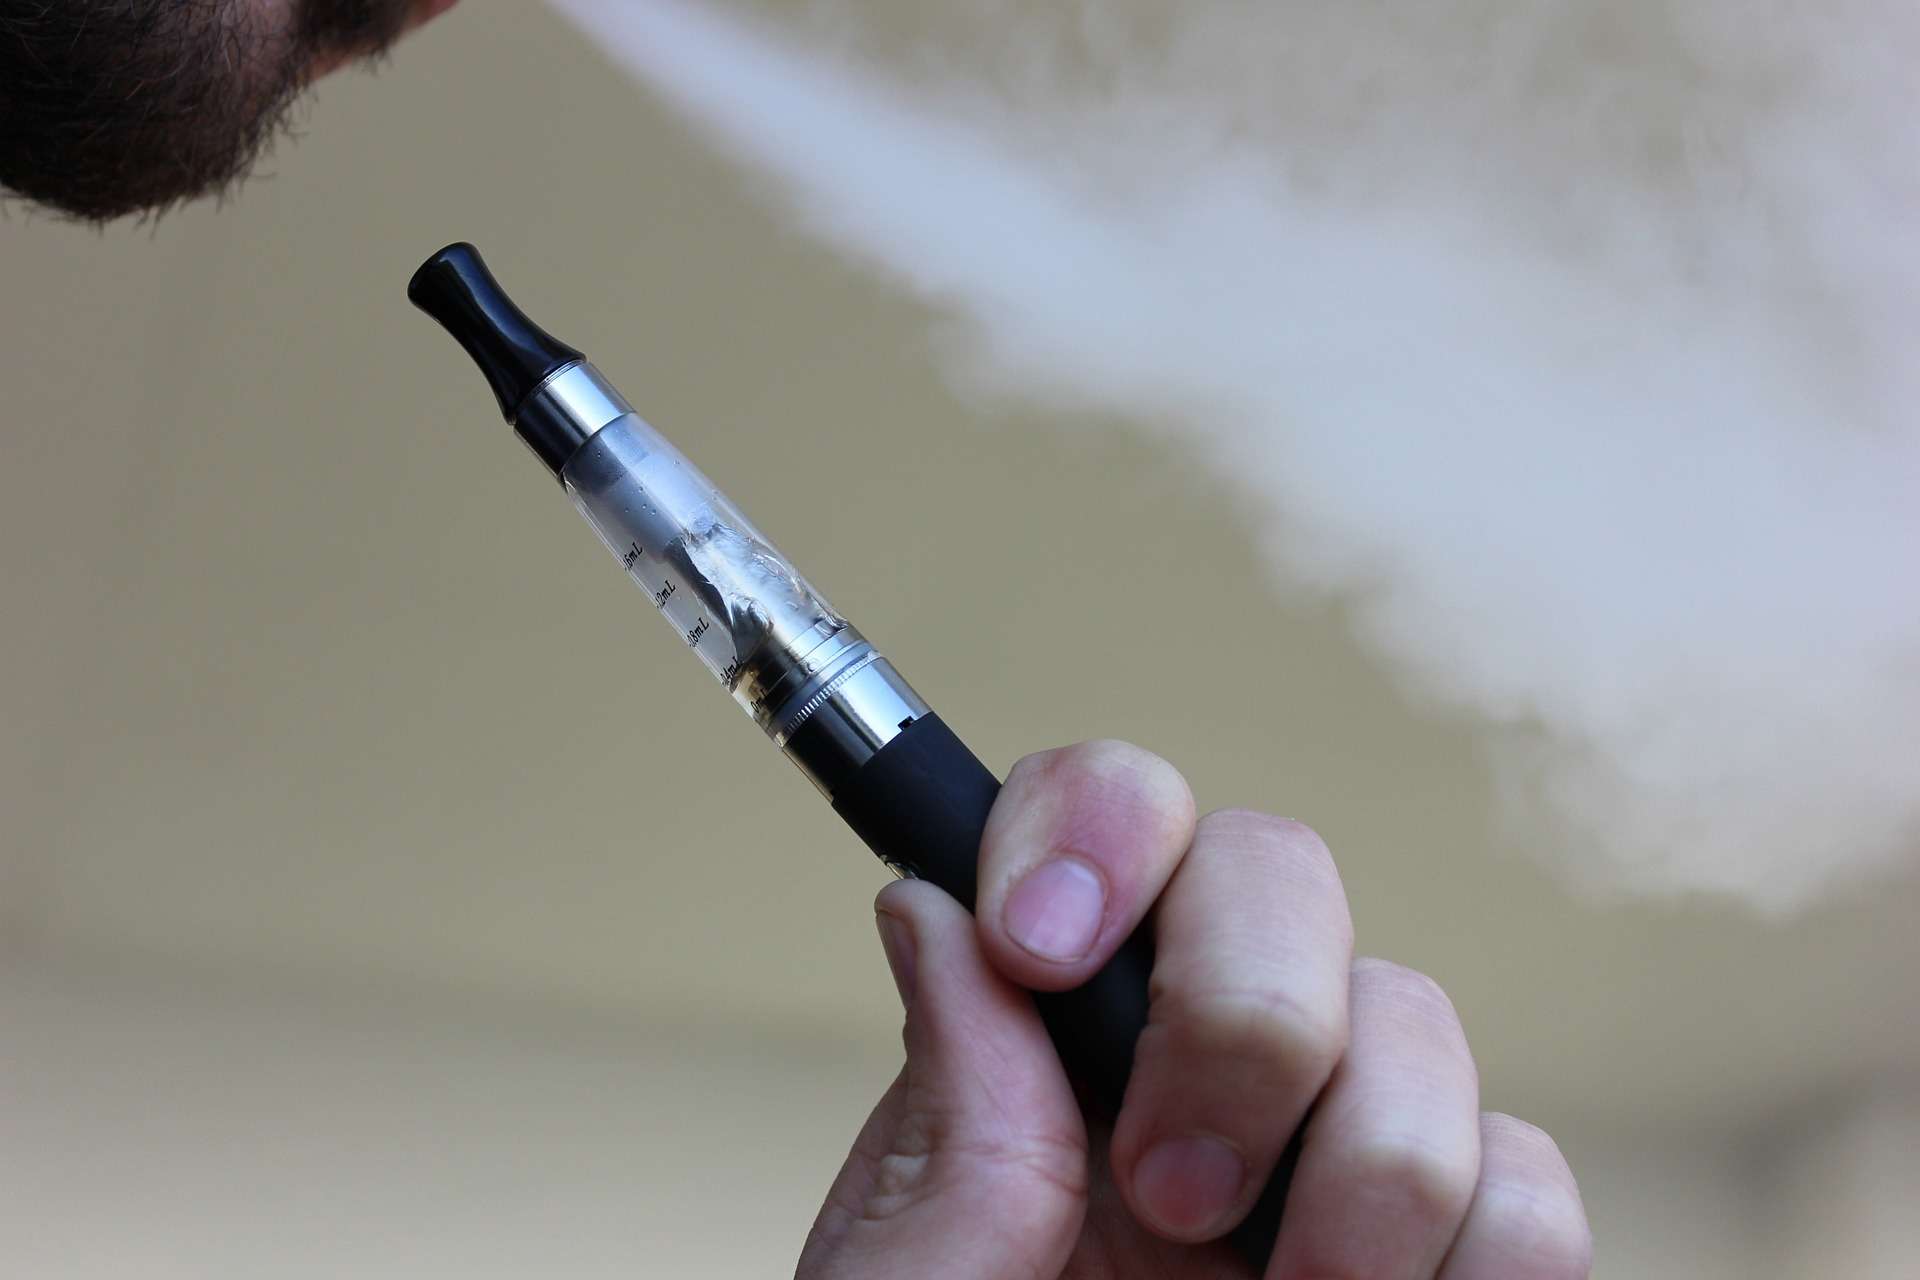 E-cigarettes might actually be a safe tool for quitting smoking